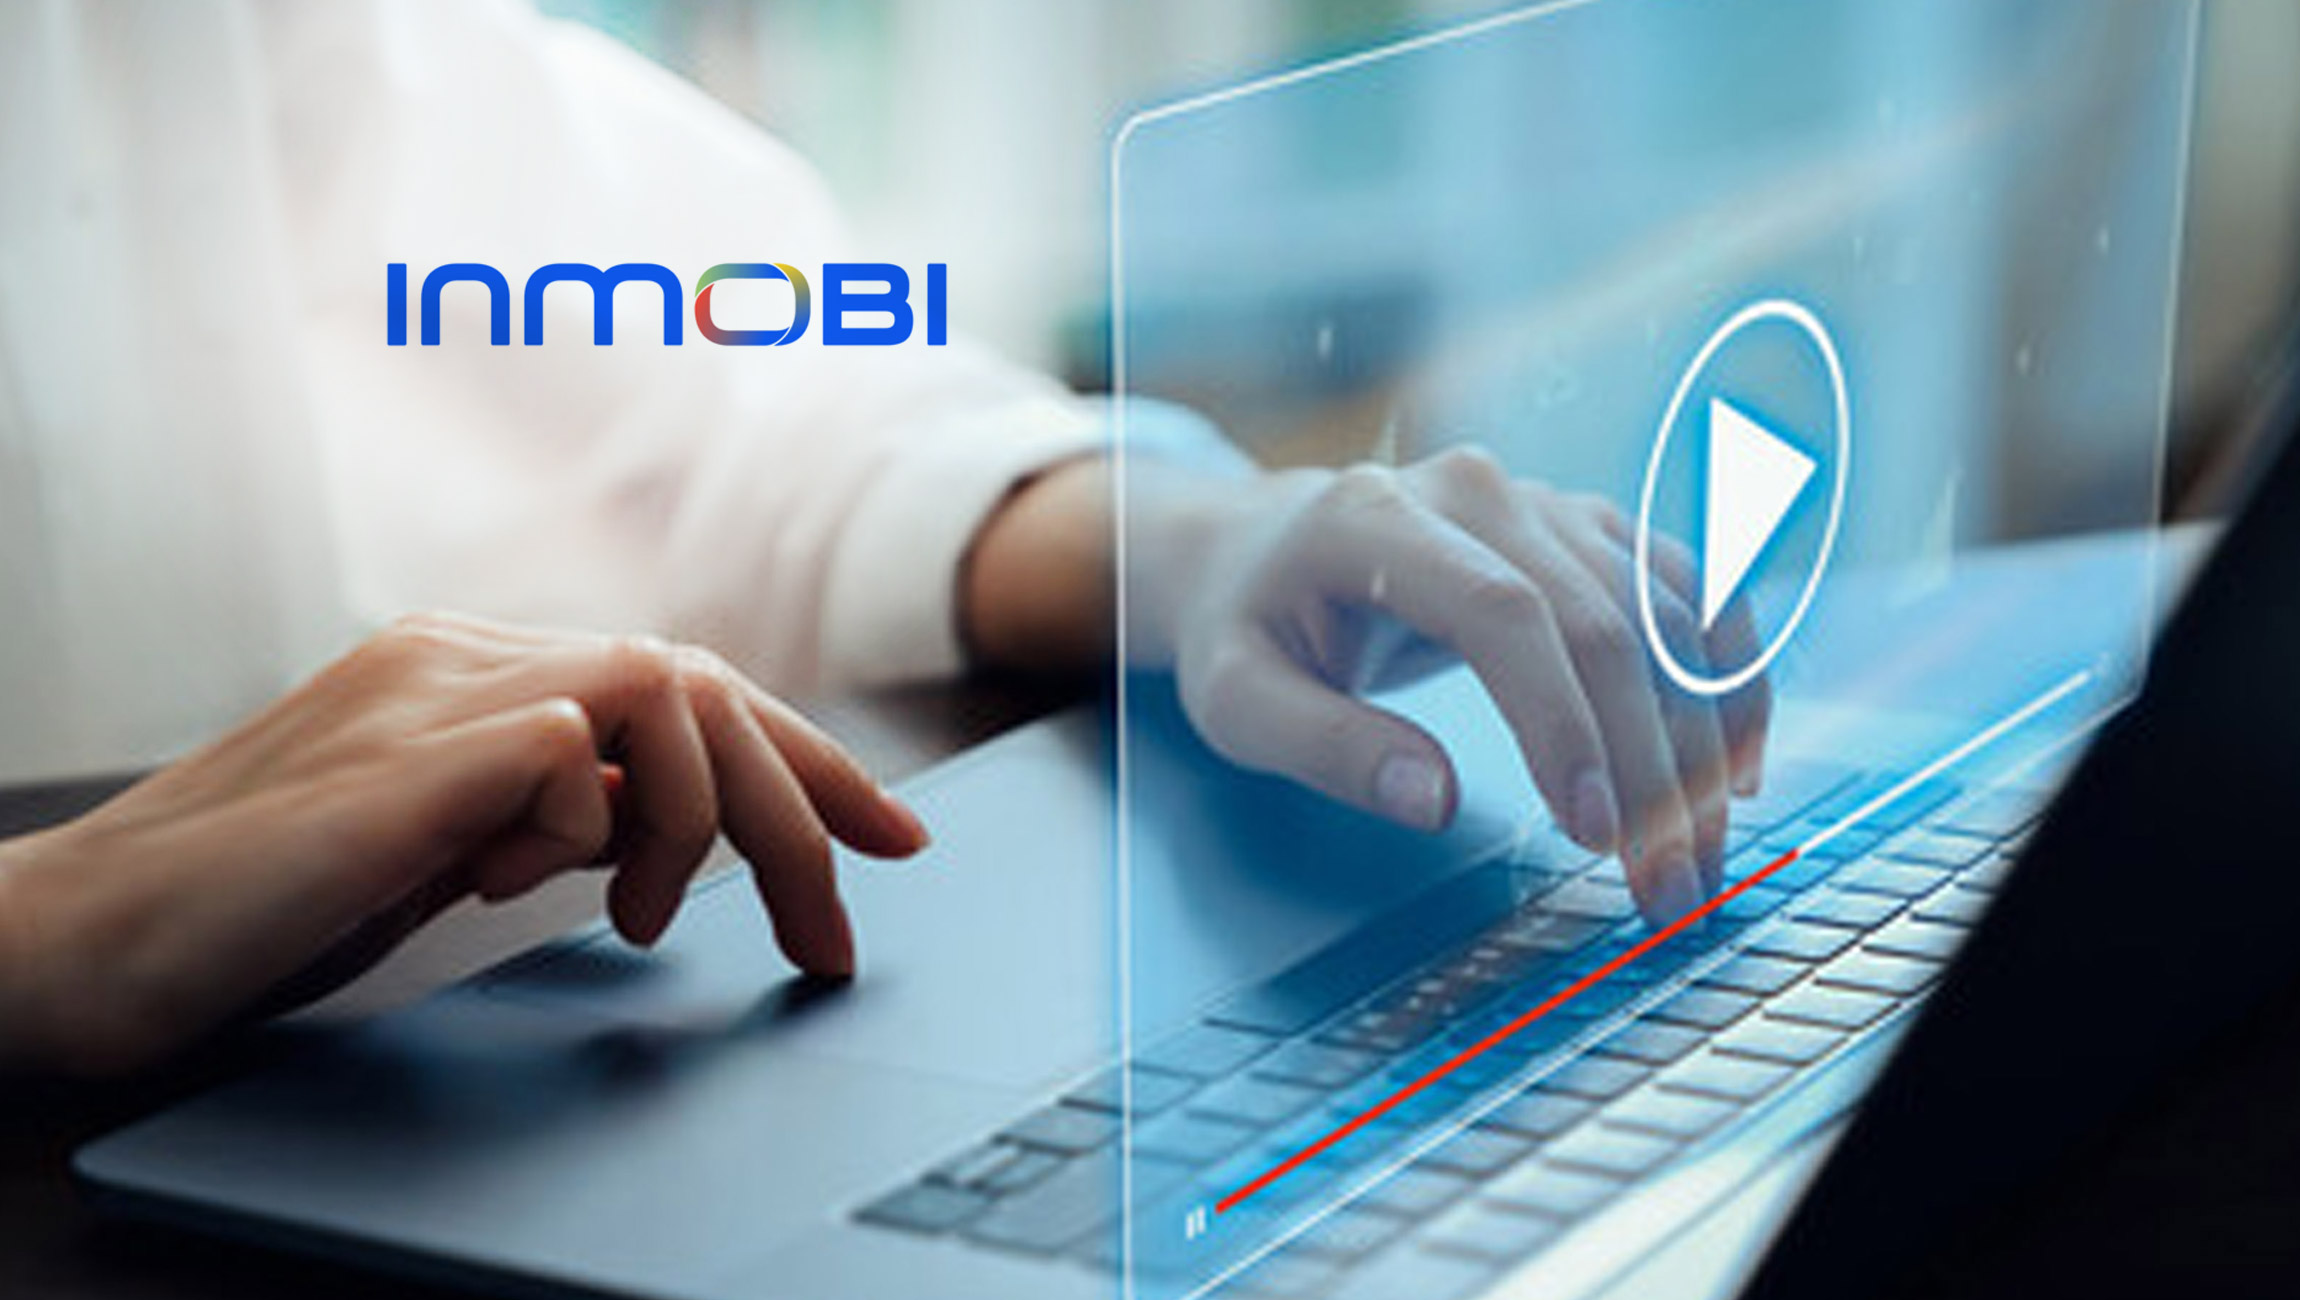 InMobi Debuts High Impact Video and Immersive Shopper Experiences for Retailers and eCommerce Businesses